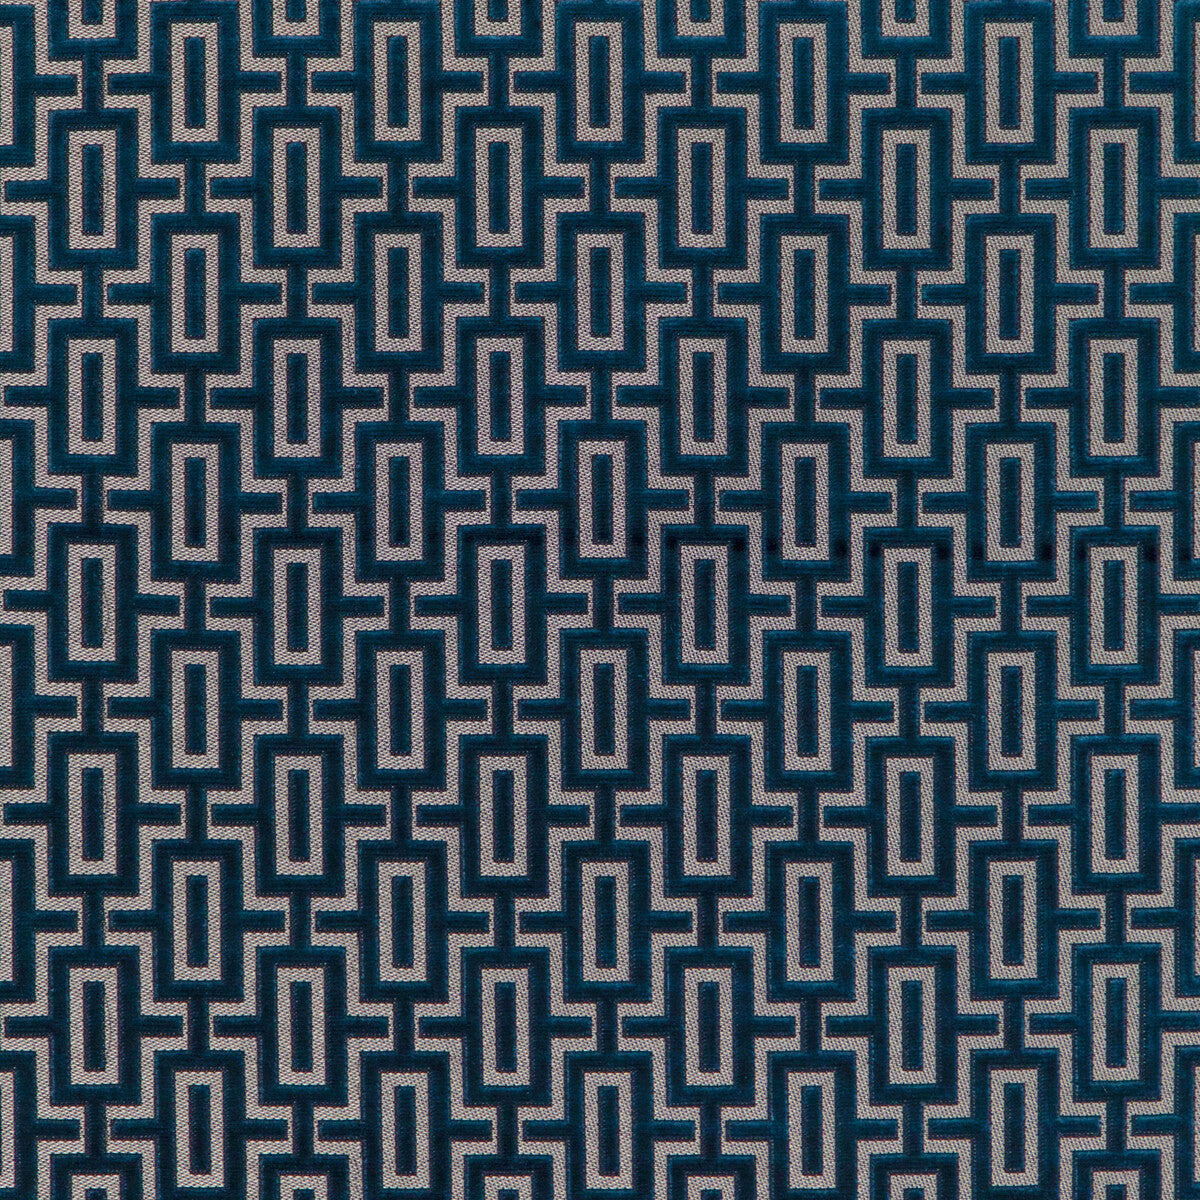 Joyride fabric in peacock color - pattern 37286.5.0 - by Kravet Contract in the Happy Hour collection